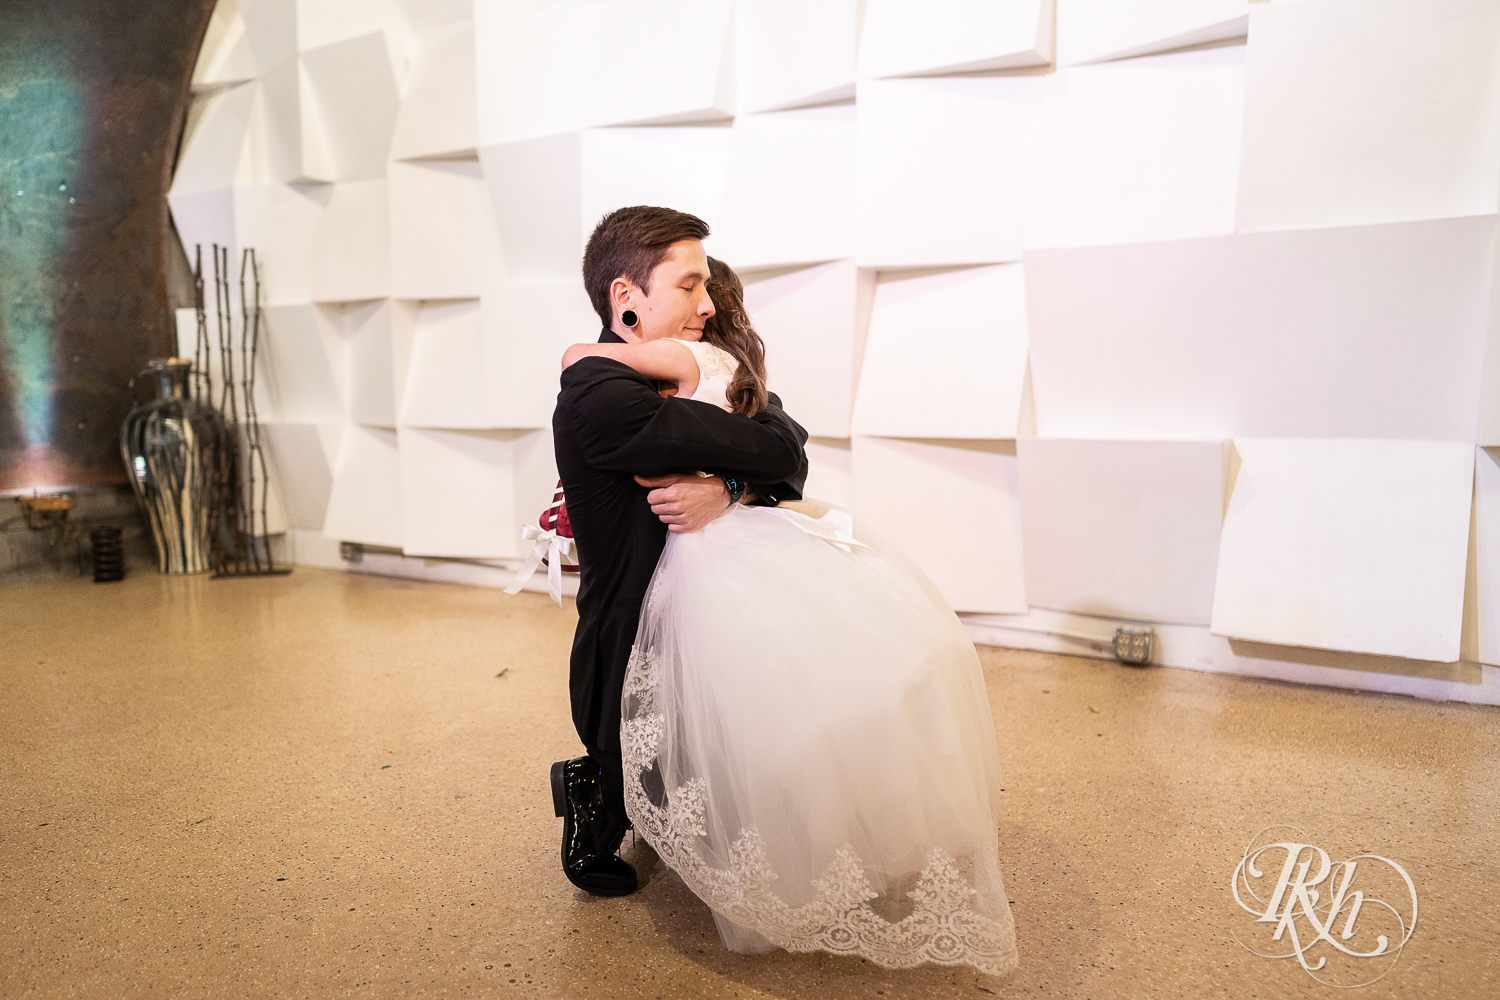 First look between groom and his daughter at Warehouse Winery in Saint Louis Park, Minnesota.